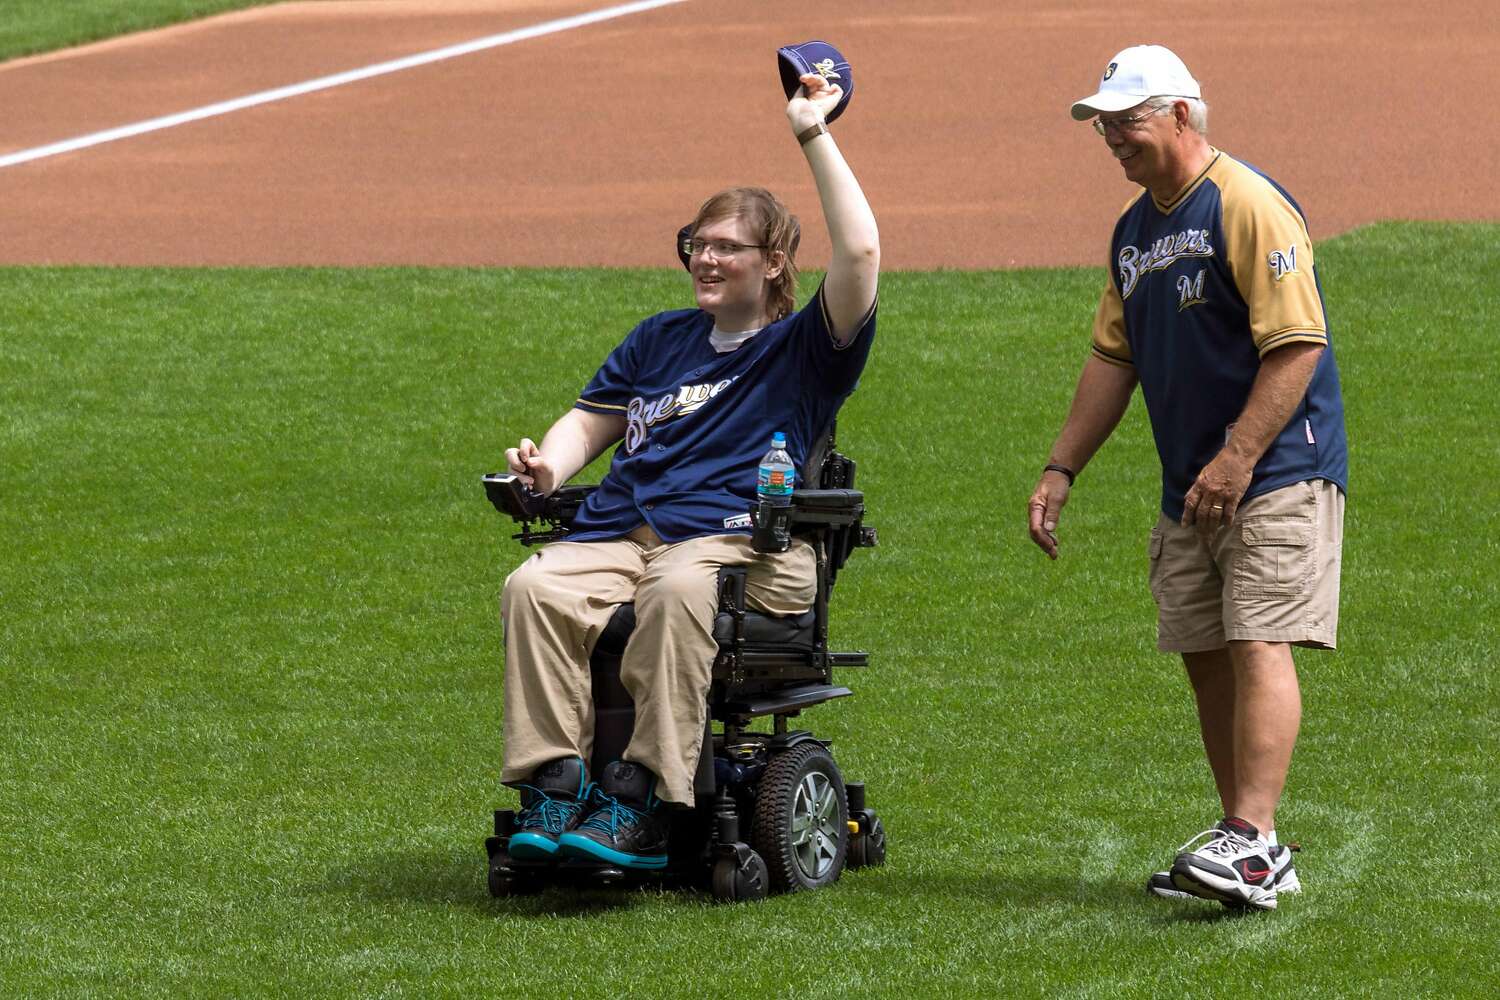 Lucas Lindner after throwing the first pitch in a baseball game.